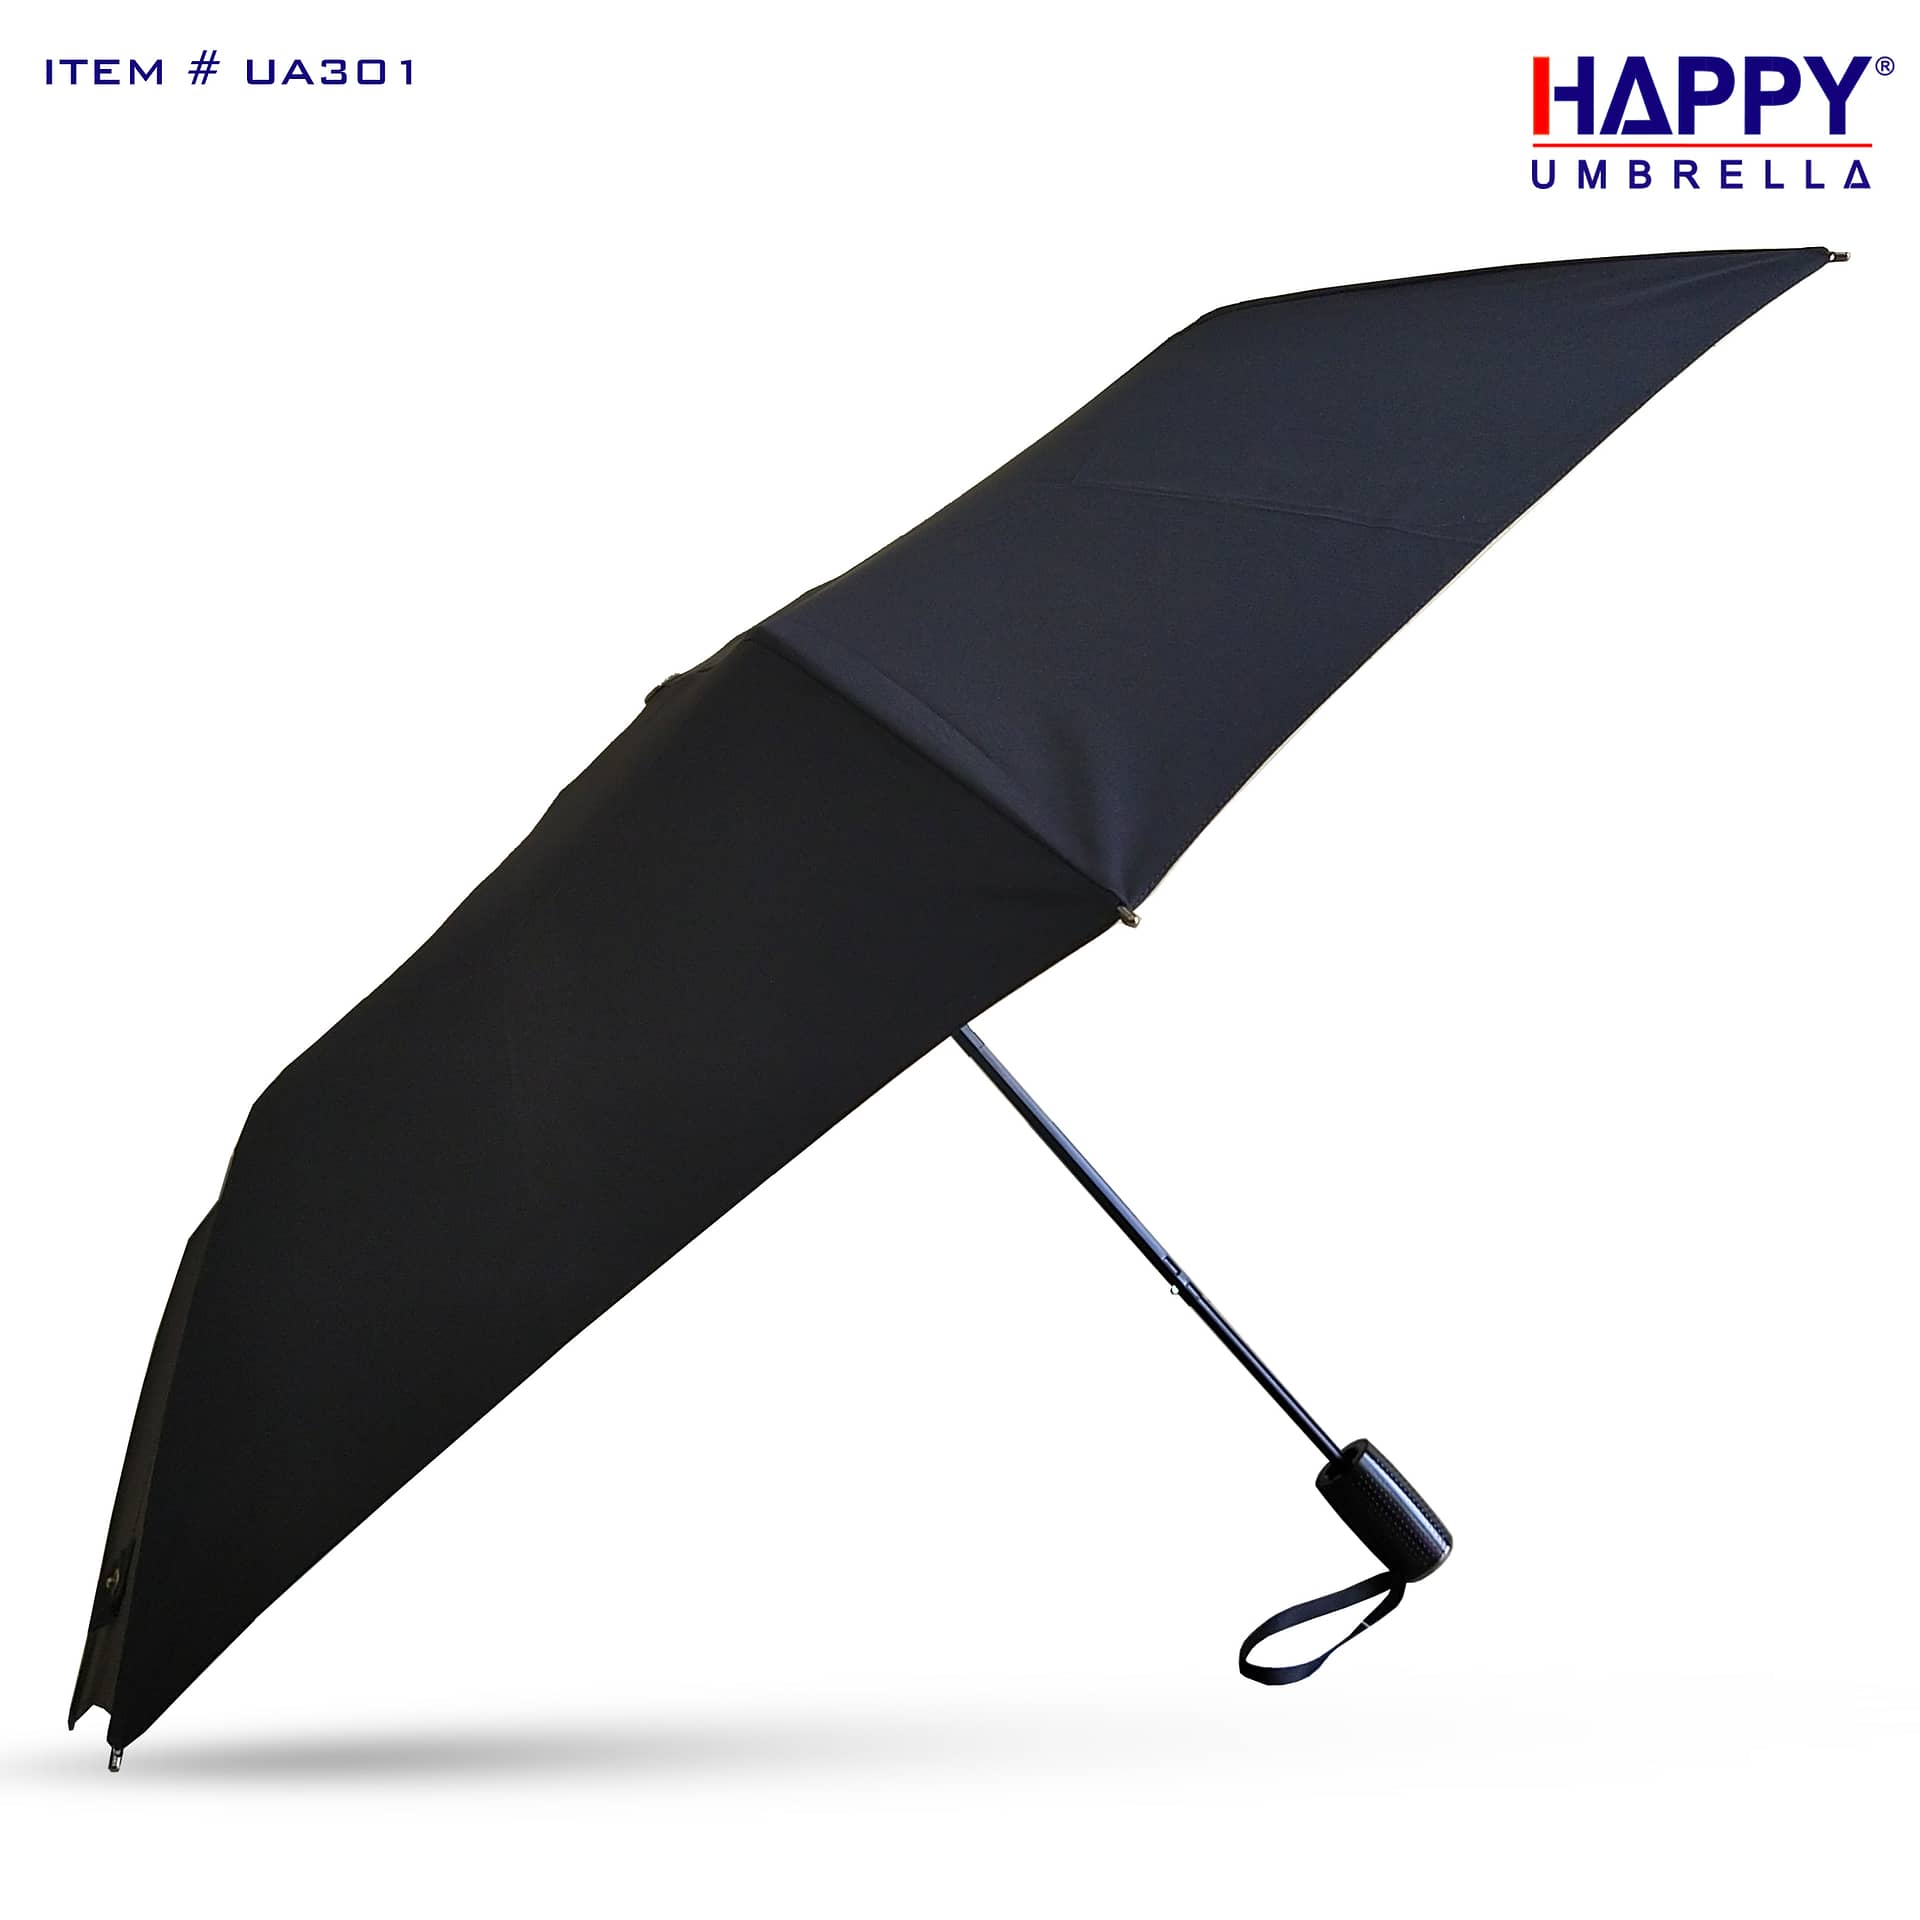 3 Section Auto Umbrella manufactured in UAE side view